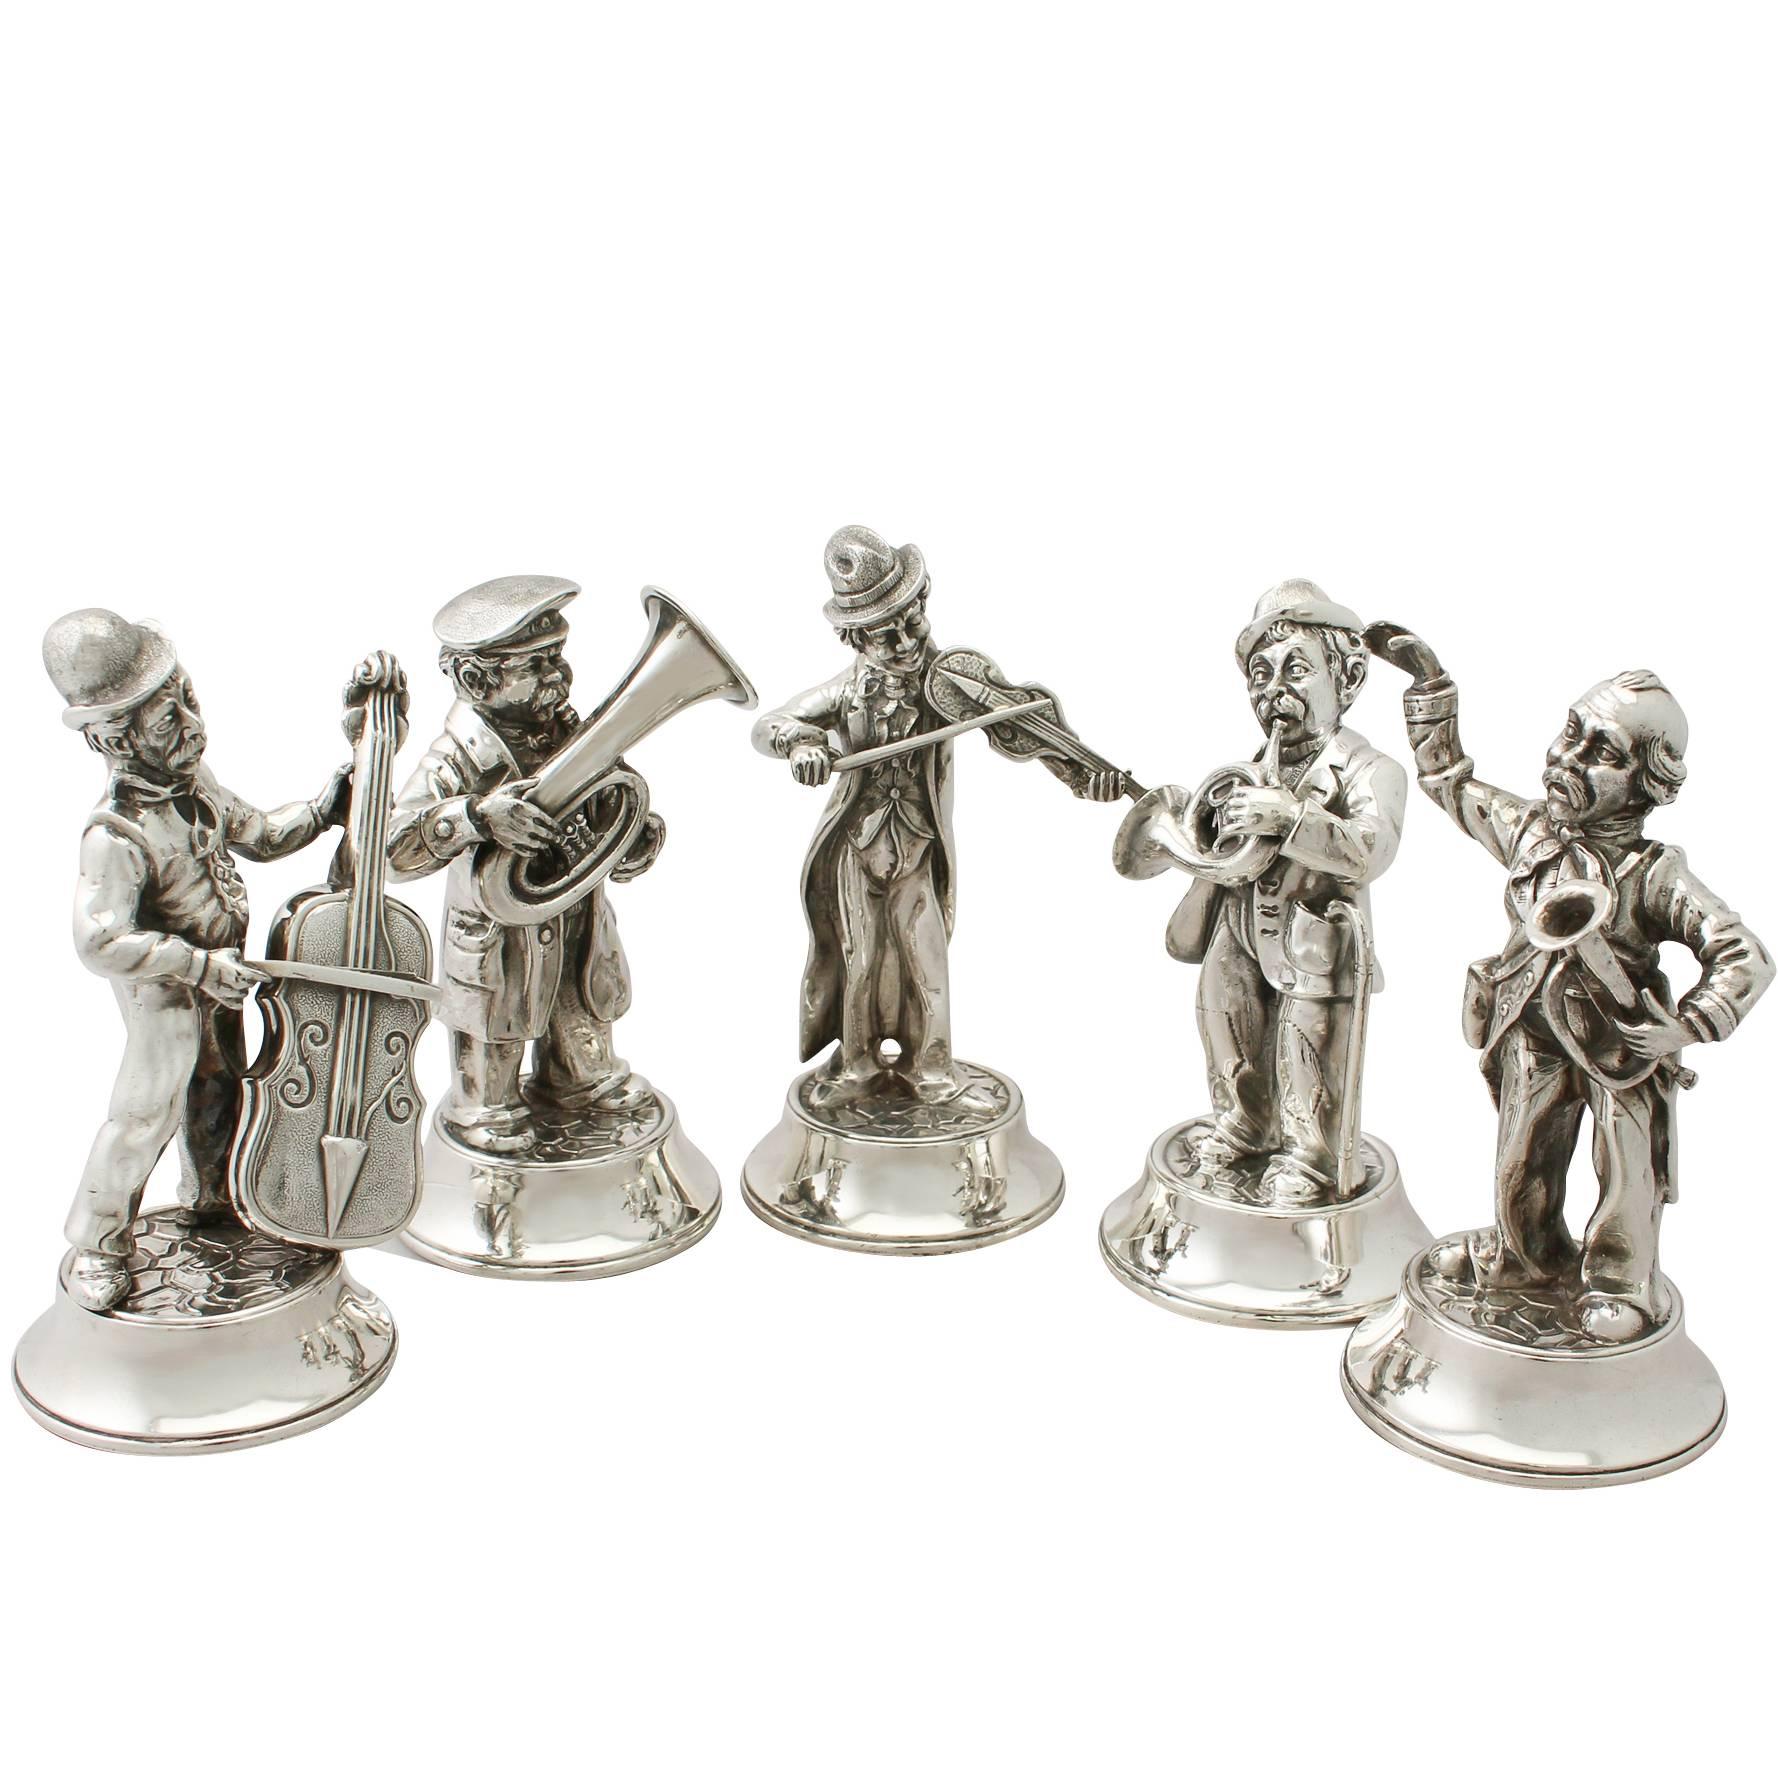 Set of Five Spanish Sterling Silver ‘Musical Quintet' Table Ornaments, Vintage